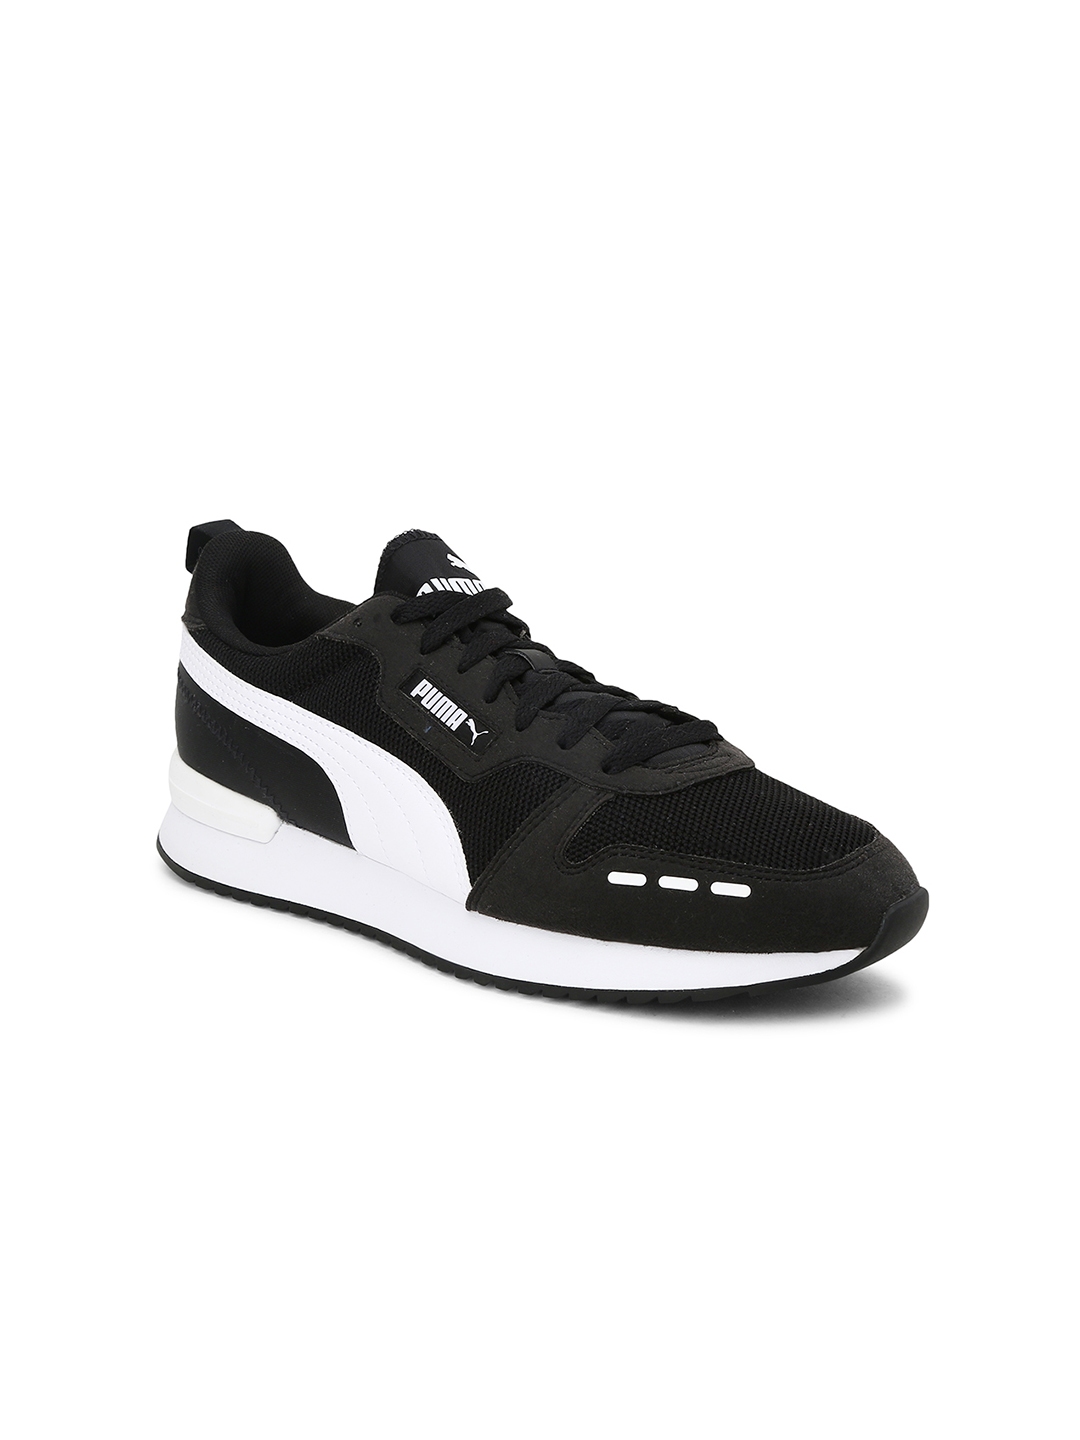 Buy Puma Unisex R78 Black Textile Sneakers - Casual Shoes for Unisex ...